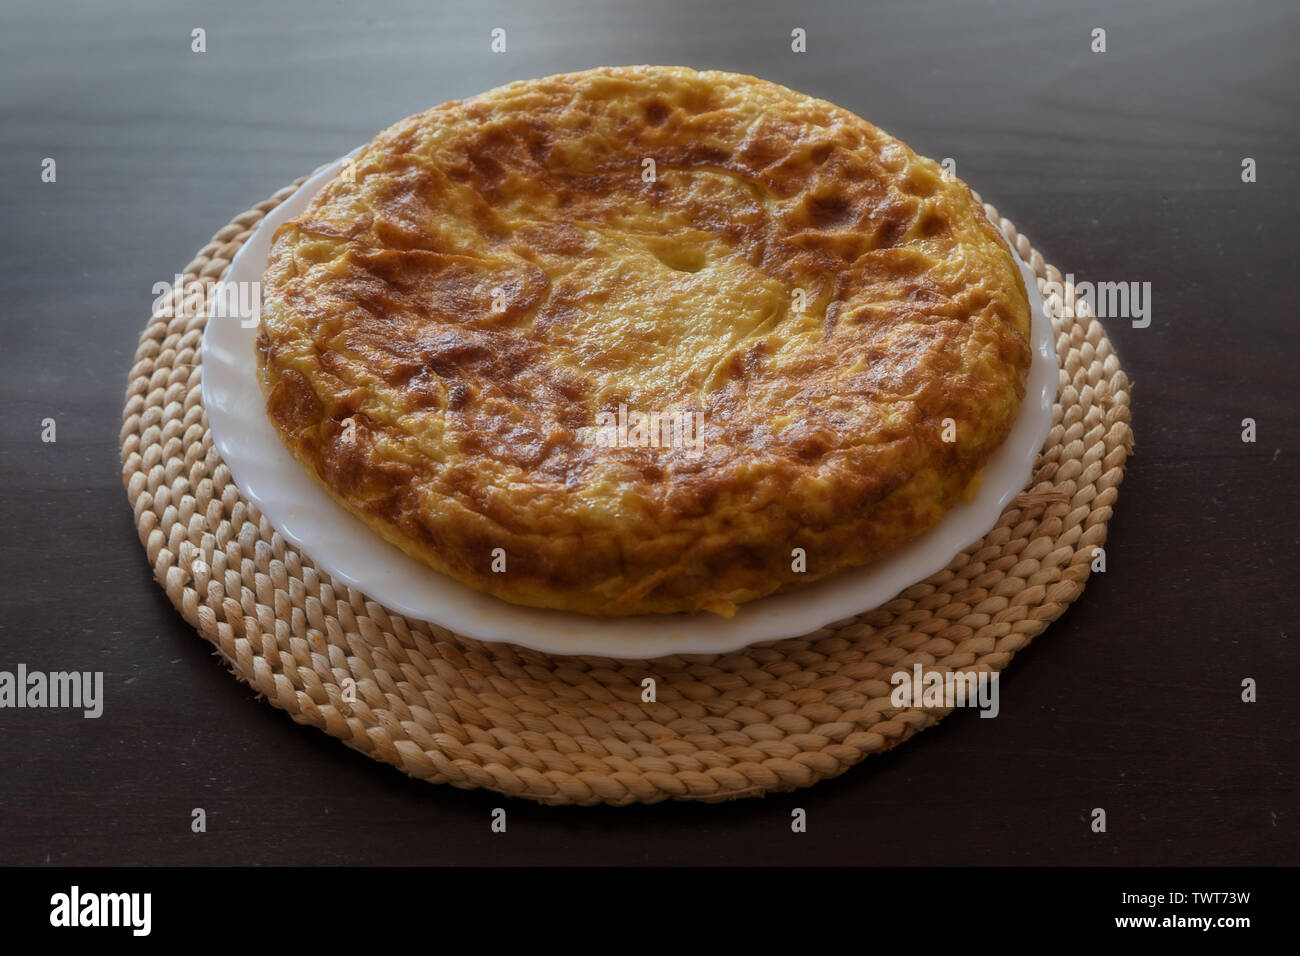 Spanish omelet, tortilla de patata, made at home Stock Photo